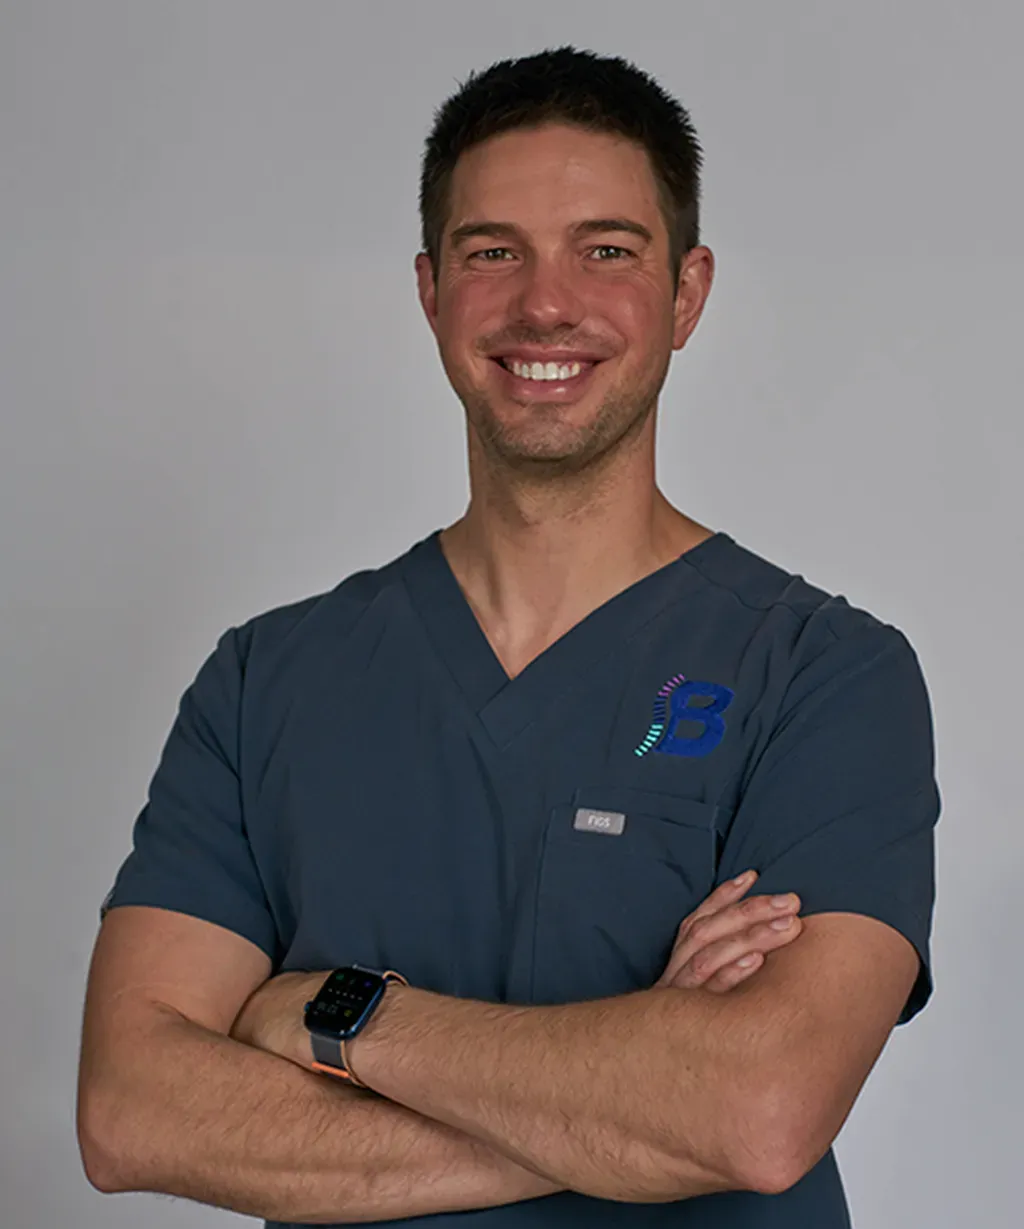 Back to You - Dr. John Putnam, PT, DPT, FAAOMPT, Dip. Osteopractic - Doctor of Physical Therapy